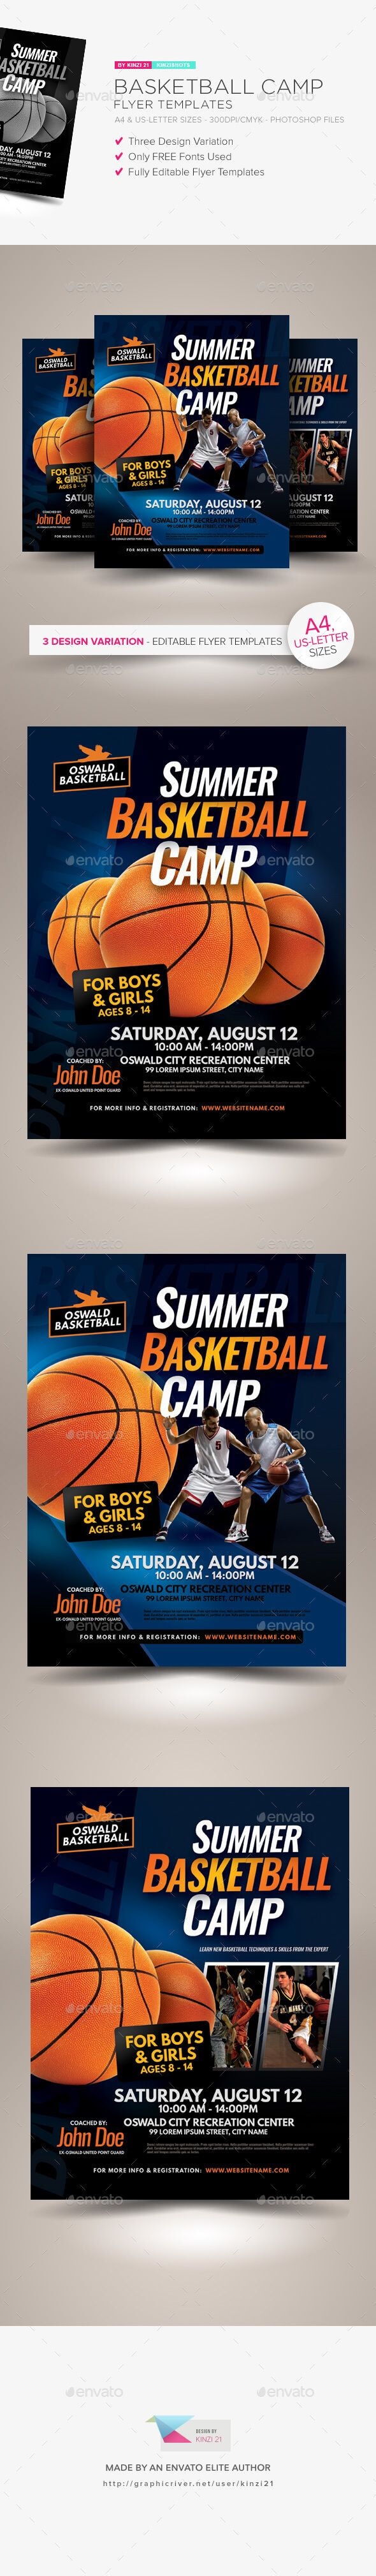 Basketball Camp Flyer Templates. Professional Sports Flyer Inside Basketball Camp Brochure Template